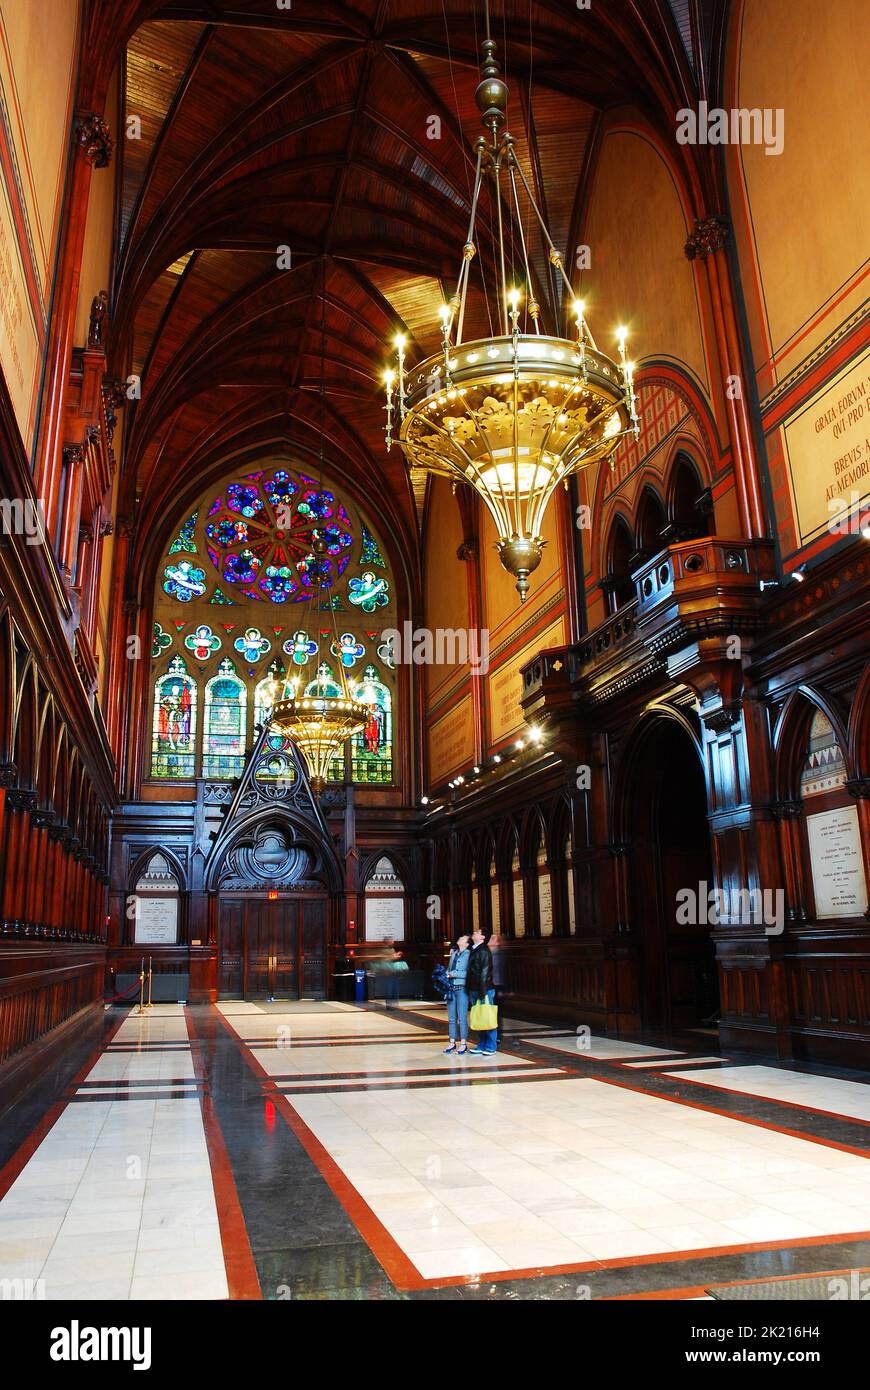 The Interior of Harvard University's Memorial Hal is designed in a Gothic style architecture with stained glass windows and a chandelier on campus Stock Photo